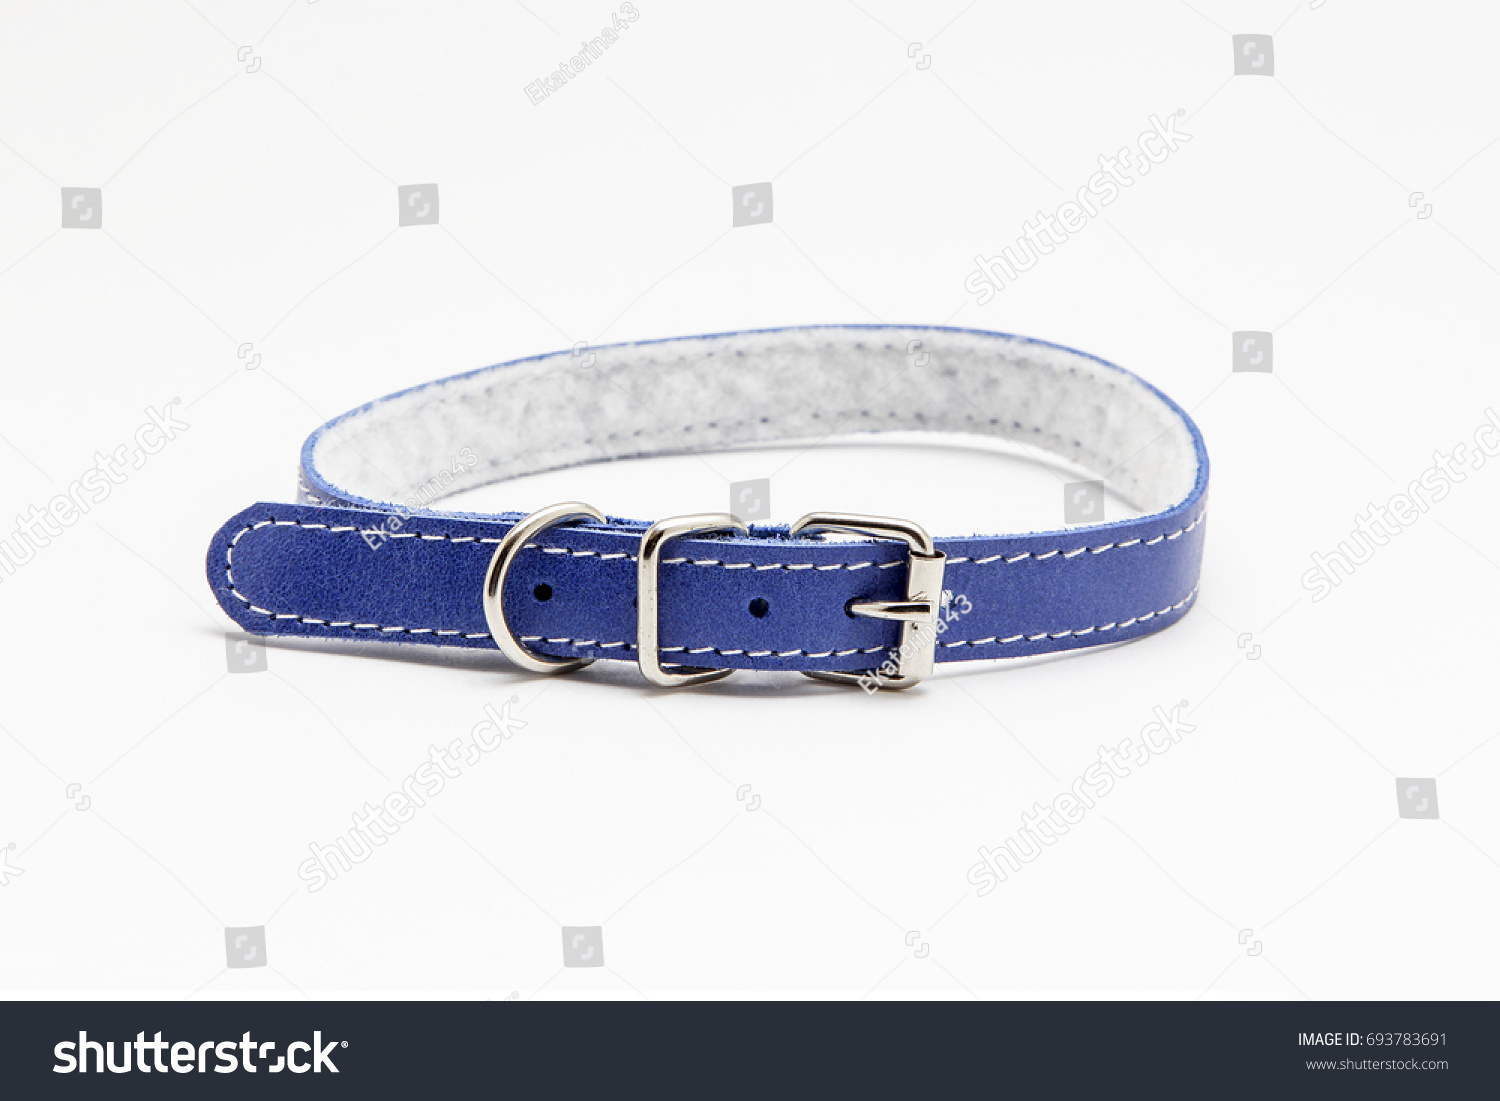 Collar for cat or dog on white background #693783691